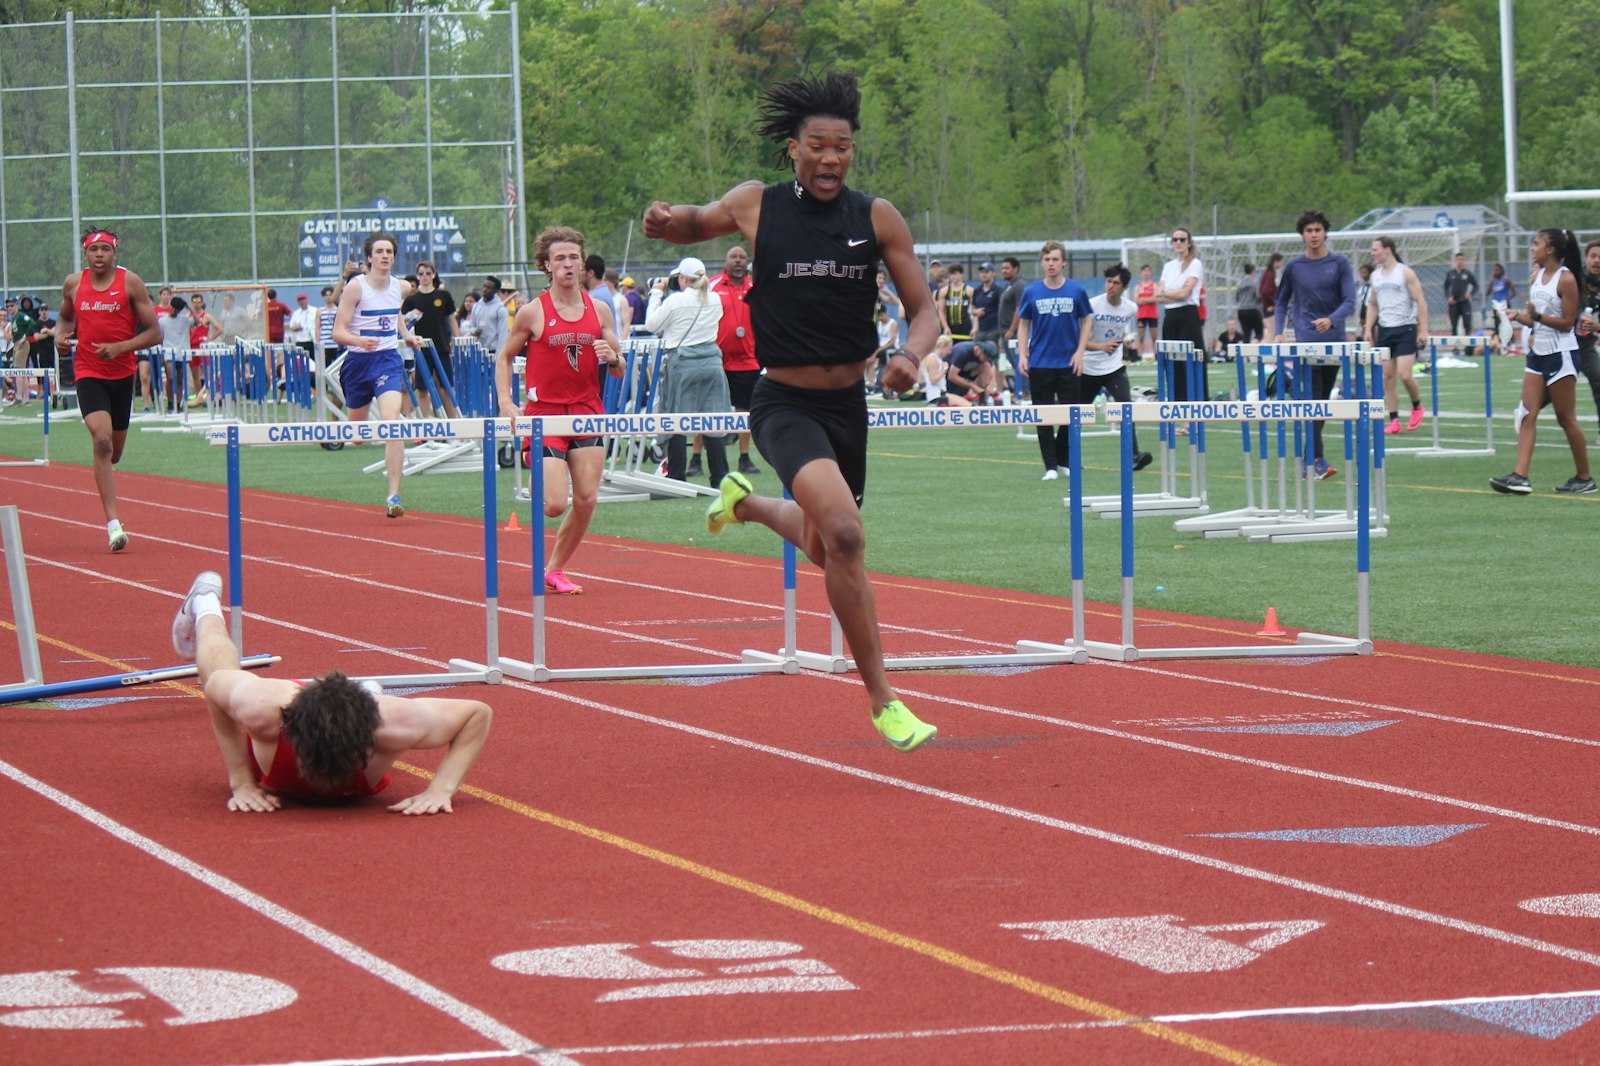 University of Detroit-Jesuit’s Elijah Dotson reacts while approaching the finish line first during the 300-meter hurdles.